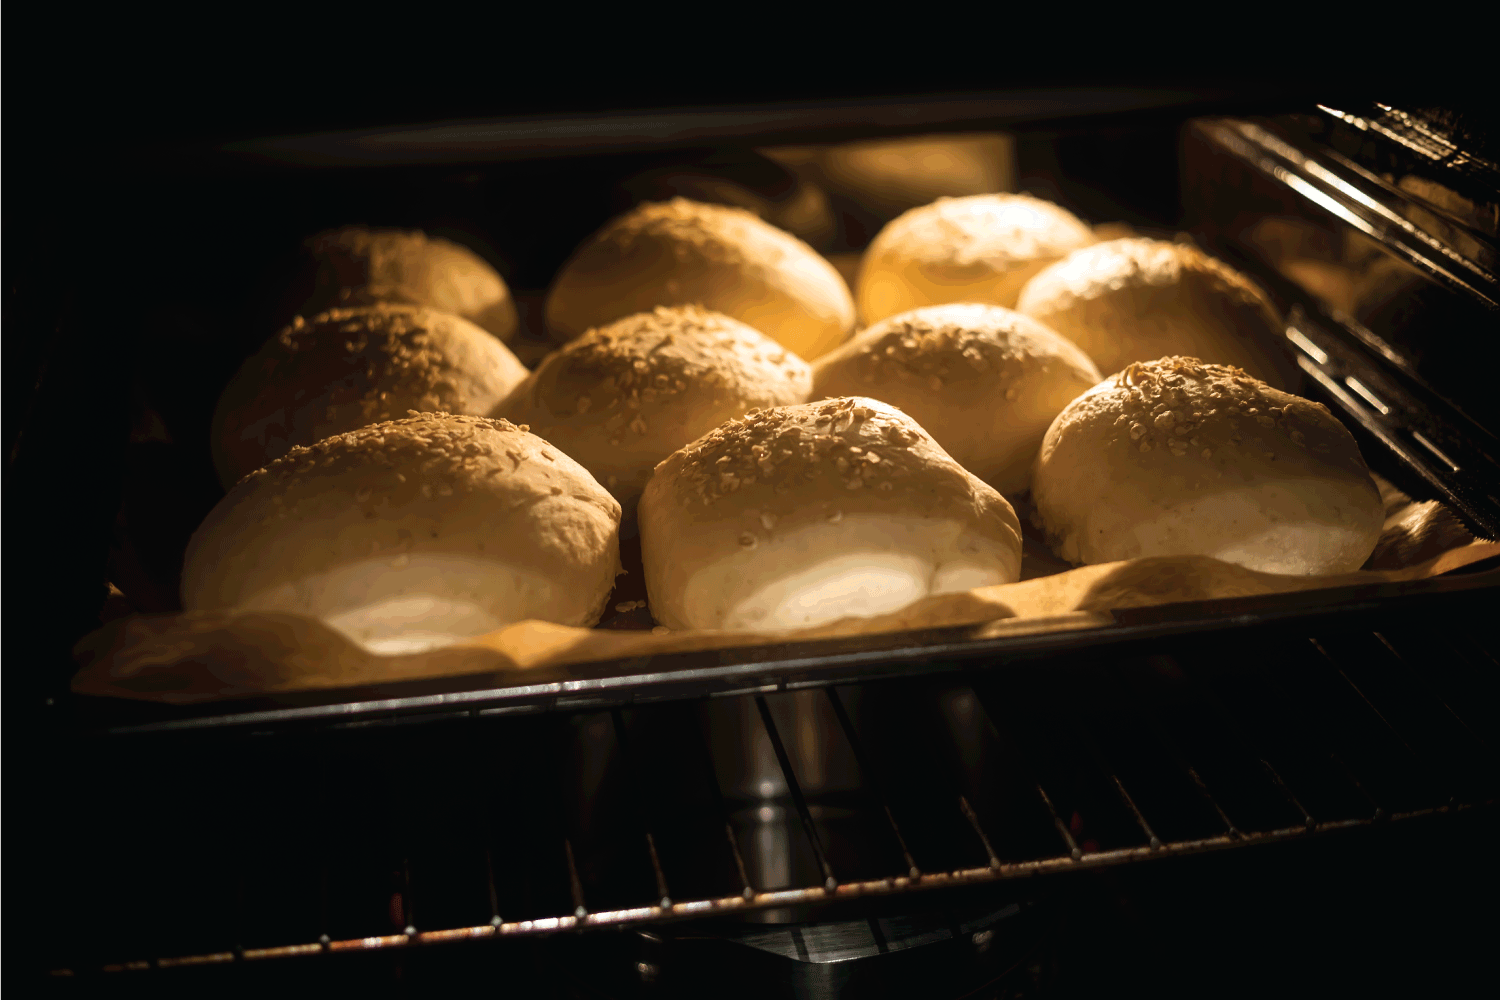 hot buns in the oven